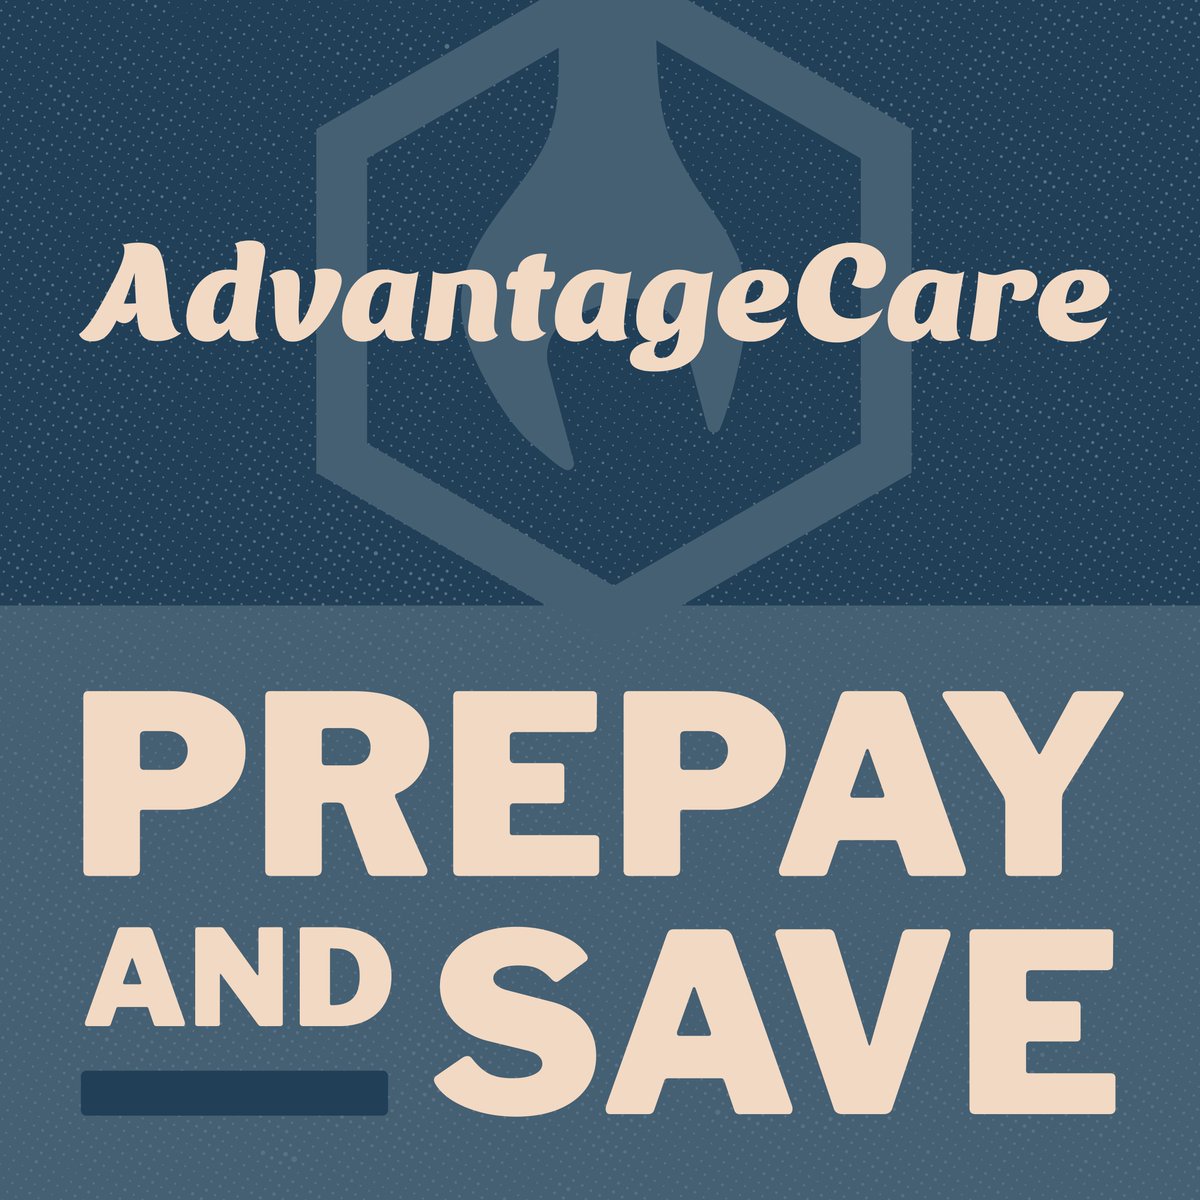 Keep your car in top shape while keeping your wallet happy! 😊 AdvantageCare is your ticket to budget-friendly car maintenance. Prepay for oil changes, tire rotations and car washes, and rejoice in the savings! 💰 #AdvantageCare Schedule service: ow.ly/AxMW50RjXsr